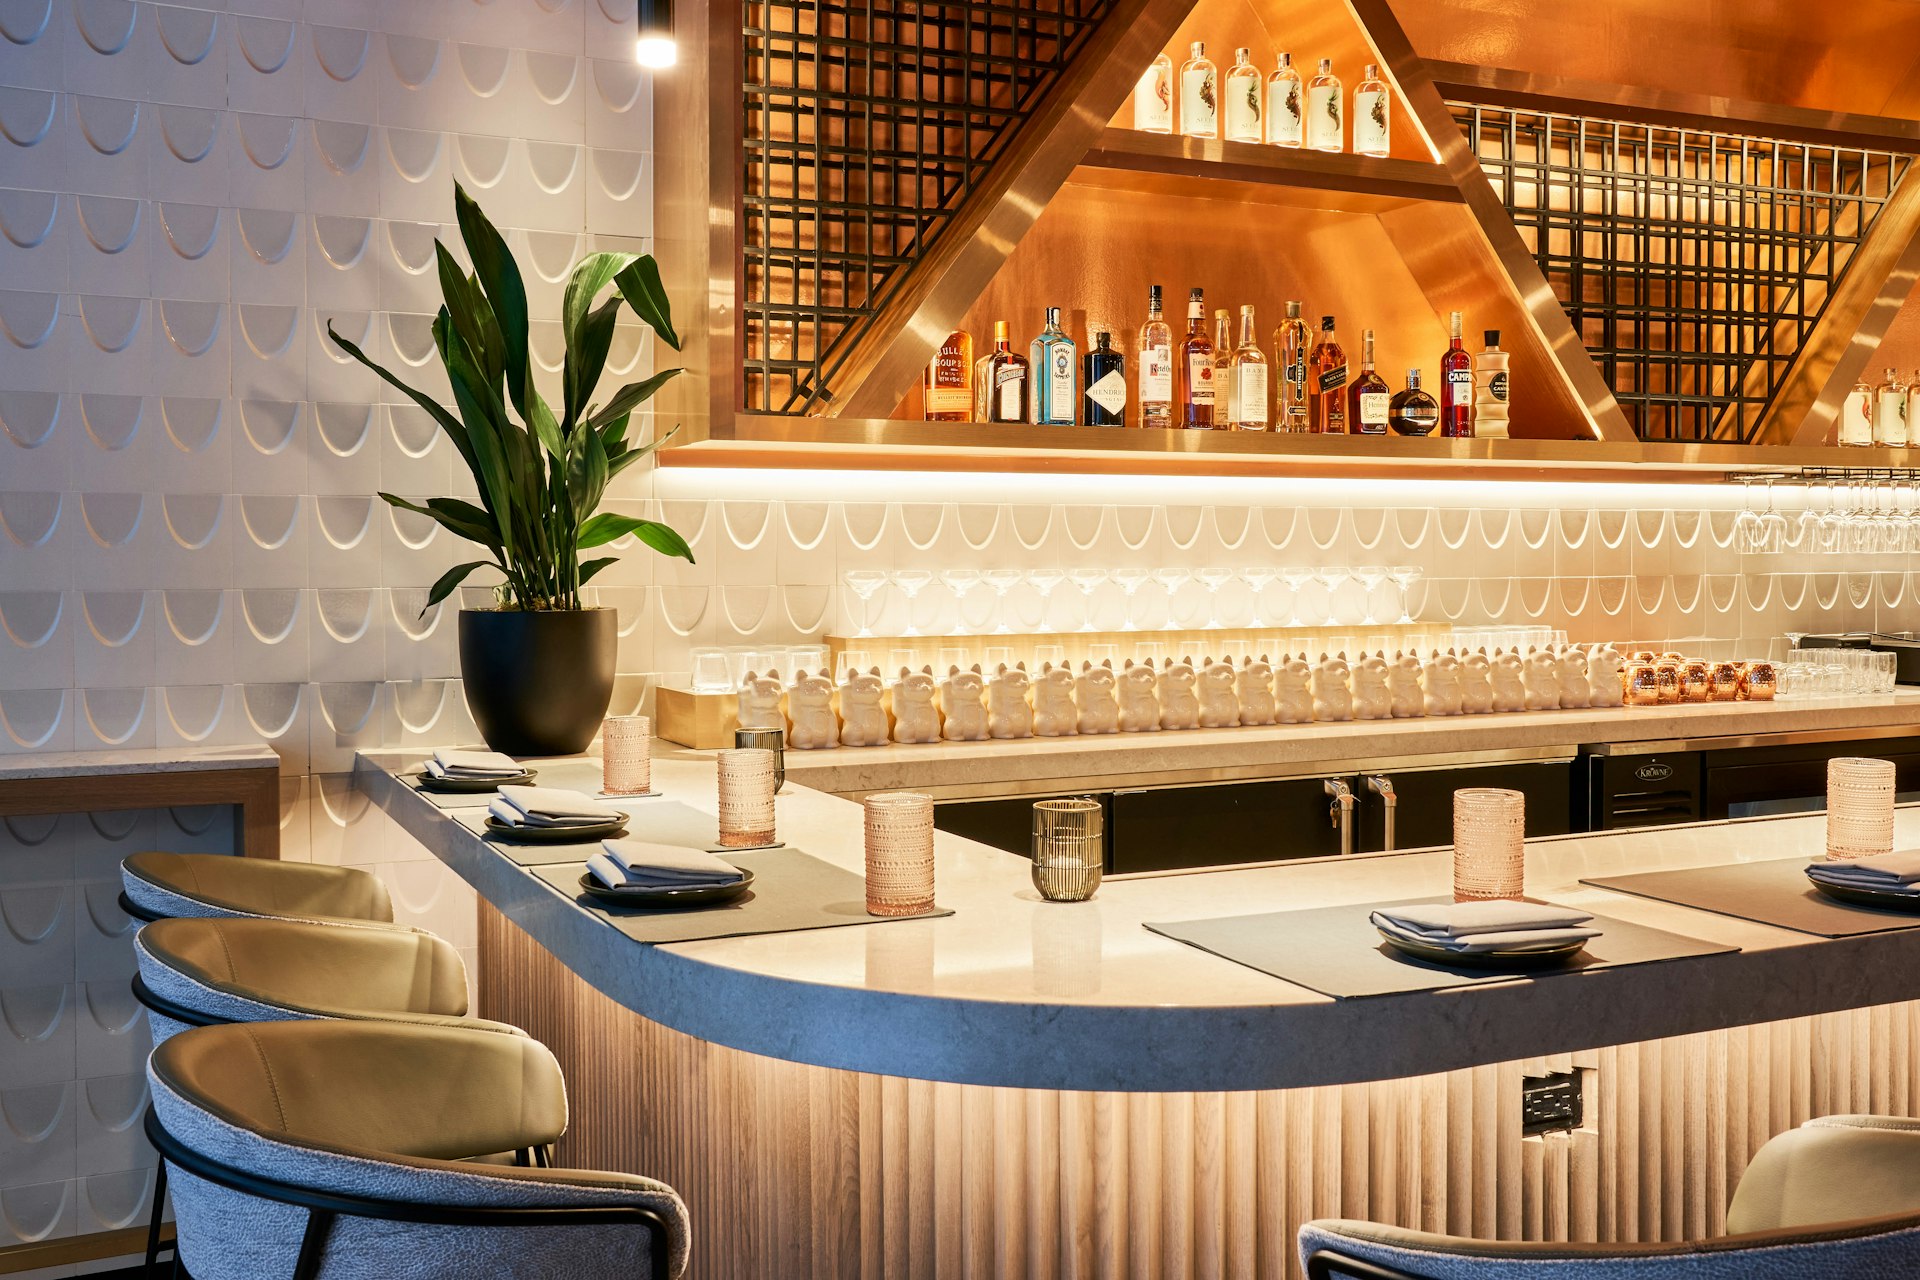 The hip bar at PLANTA Queen, NoMad